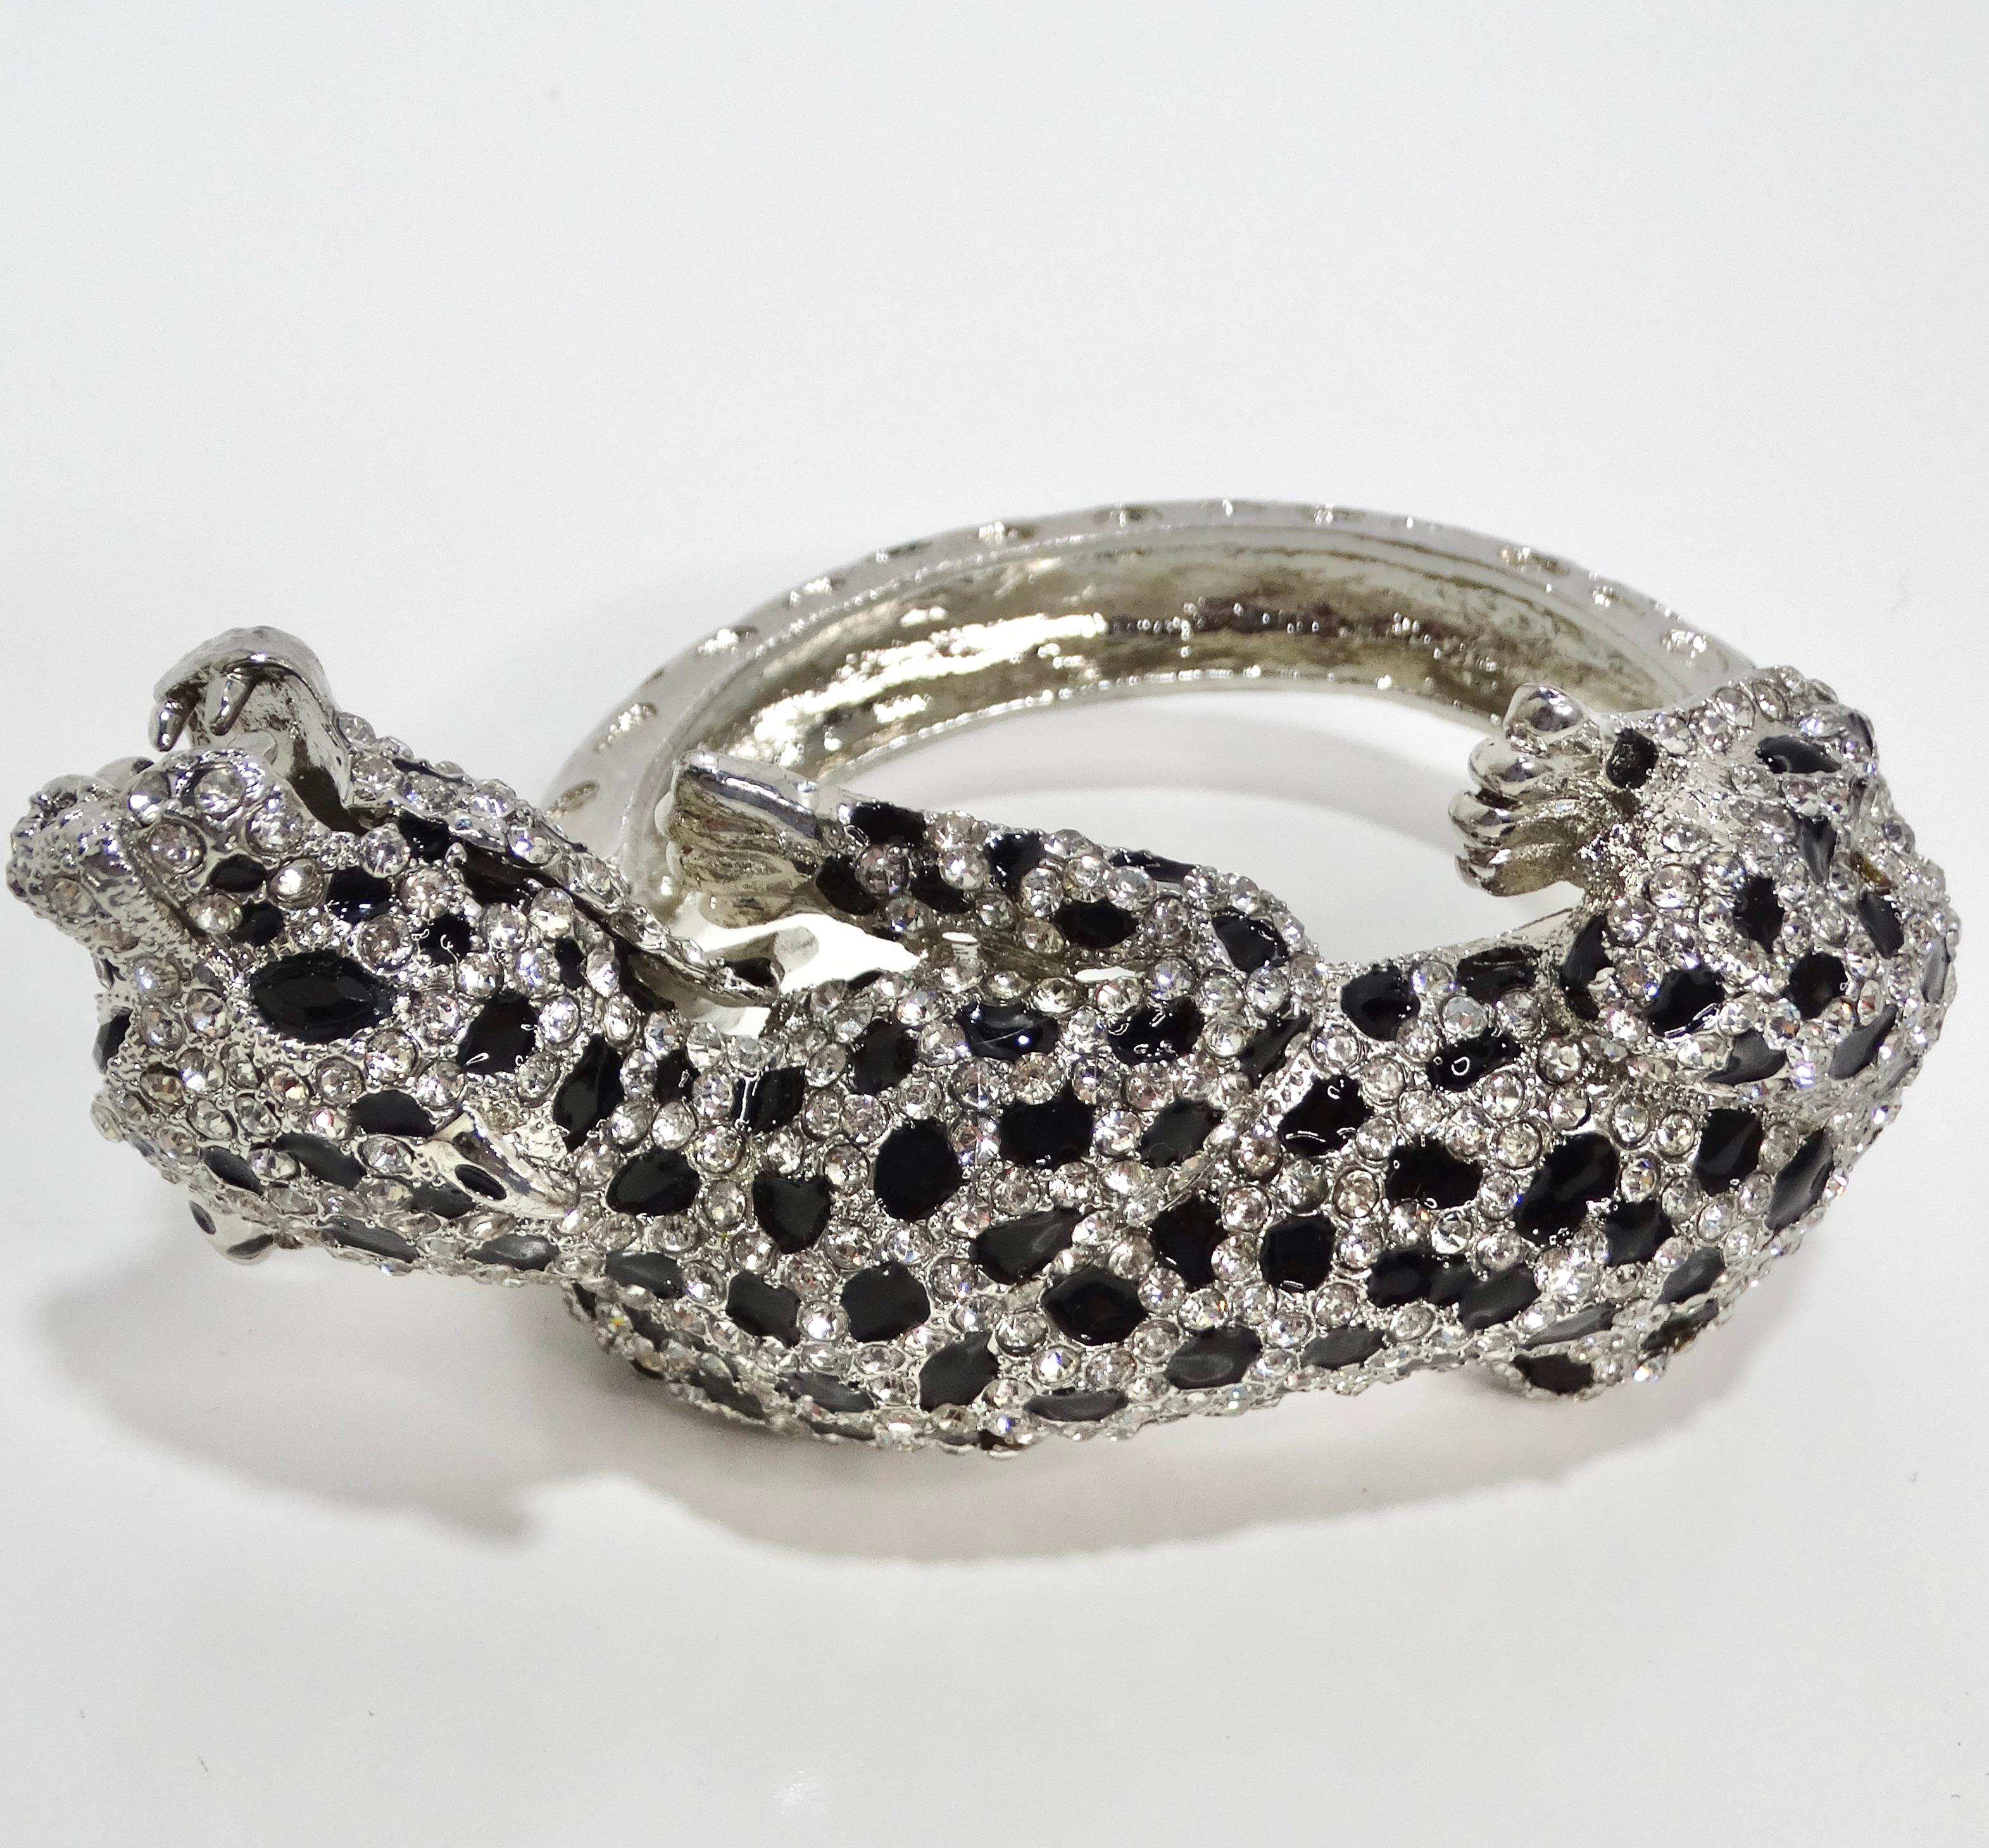 Introducing the 1990s Cartier Inspired Rhinestone Panther Cuff Bracelet, a stunning and glamorous accessory that exudes elegance and sophistication. Crafted from silver-plated metal, this cuff bracelet features a large panther motif adorned with